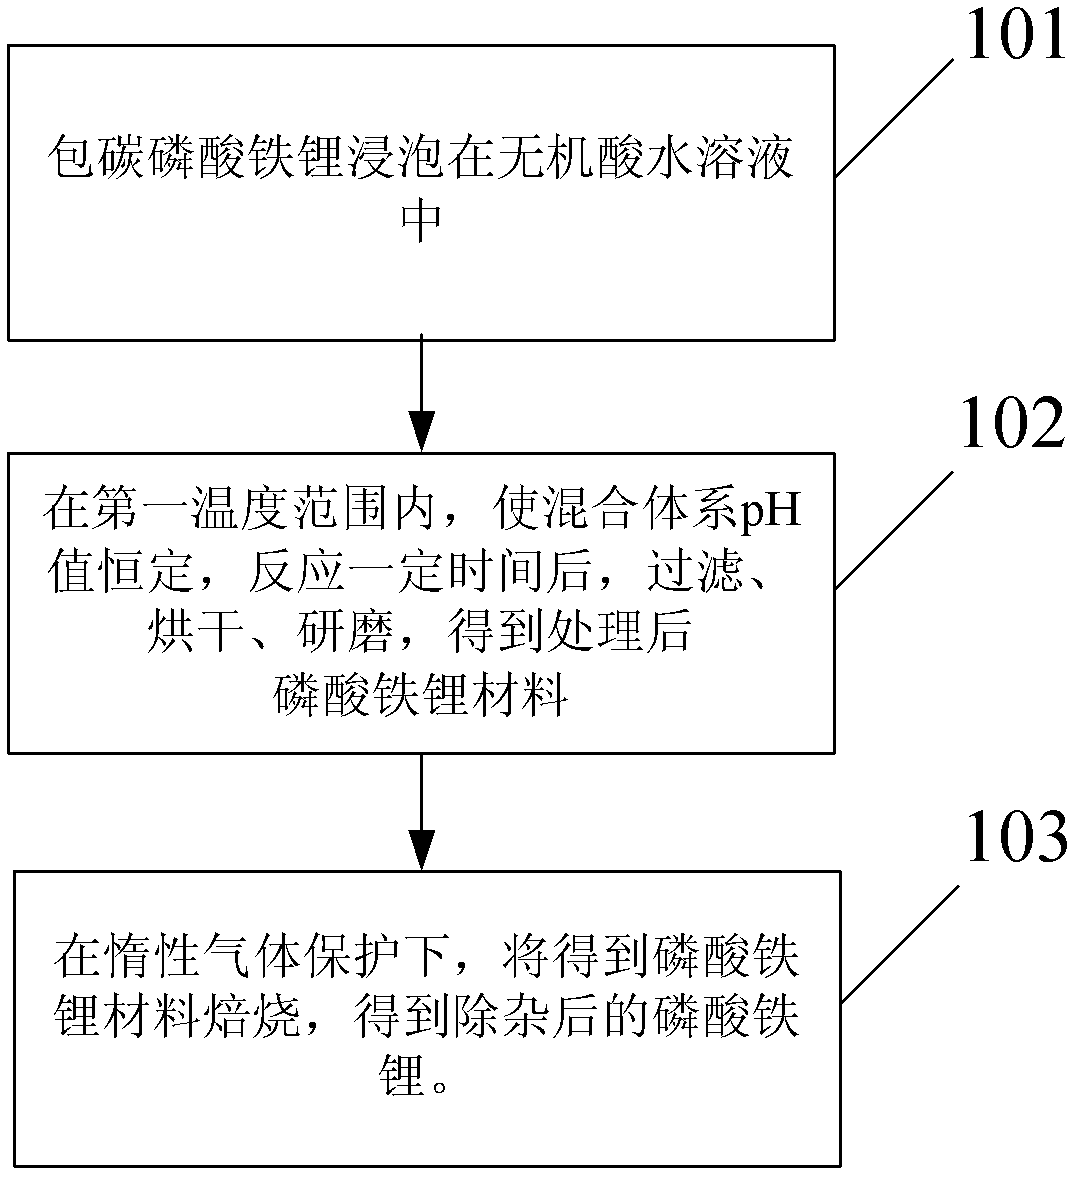 Method for removing impurities from lithium iron phosphate (LiFePO4) and LiFePO4 battery